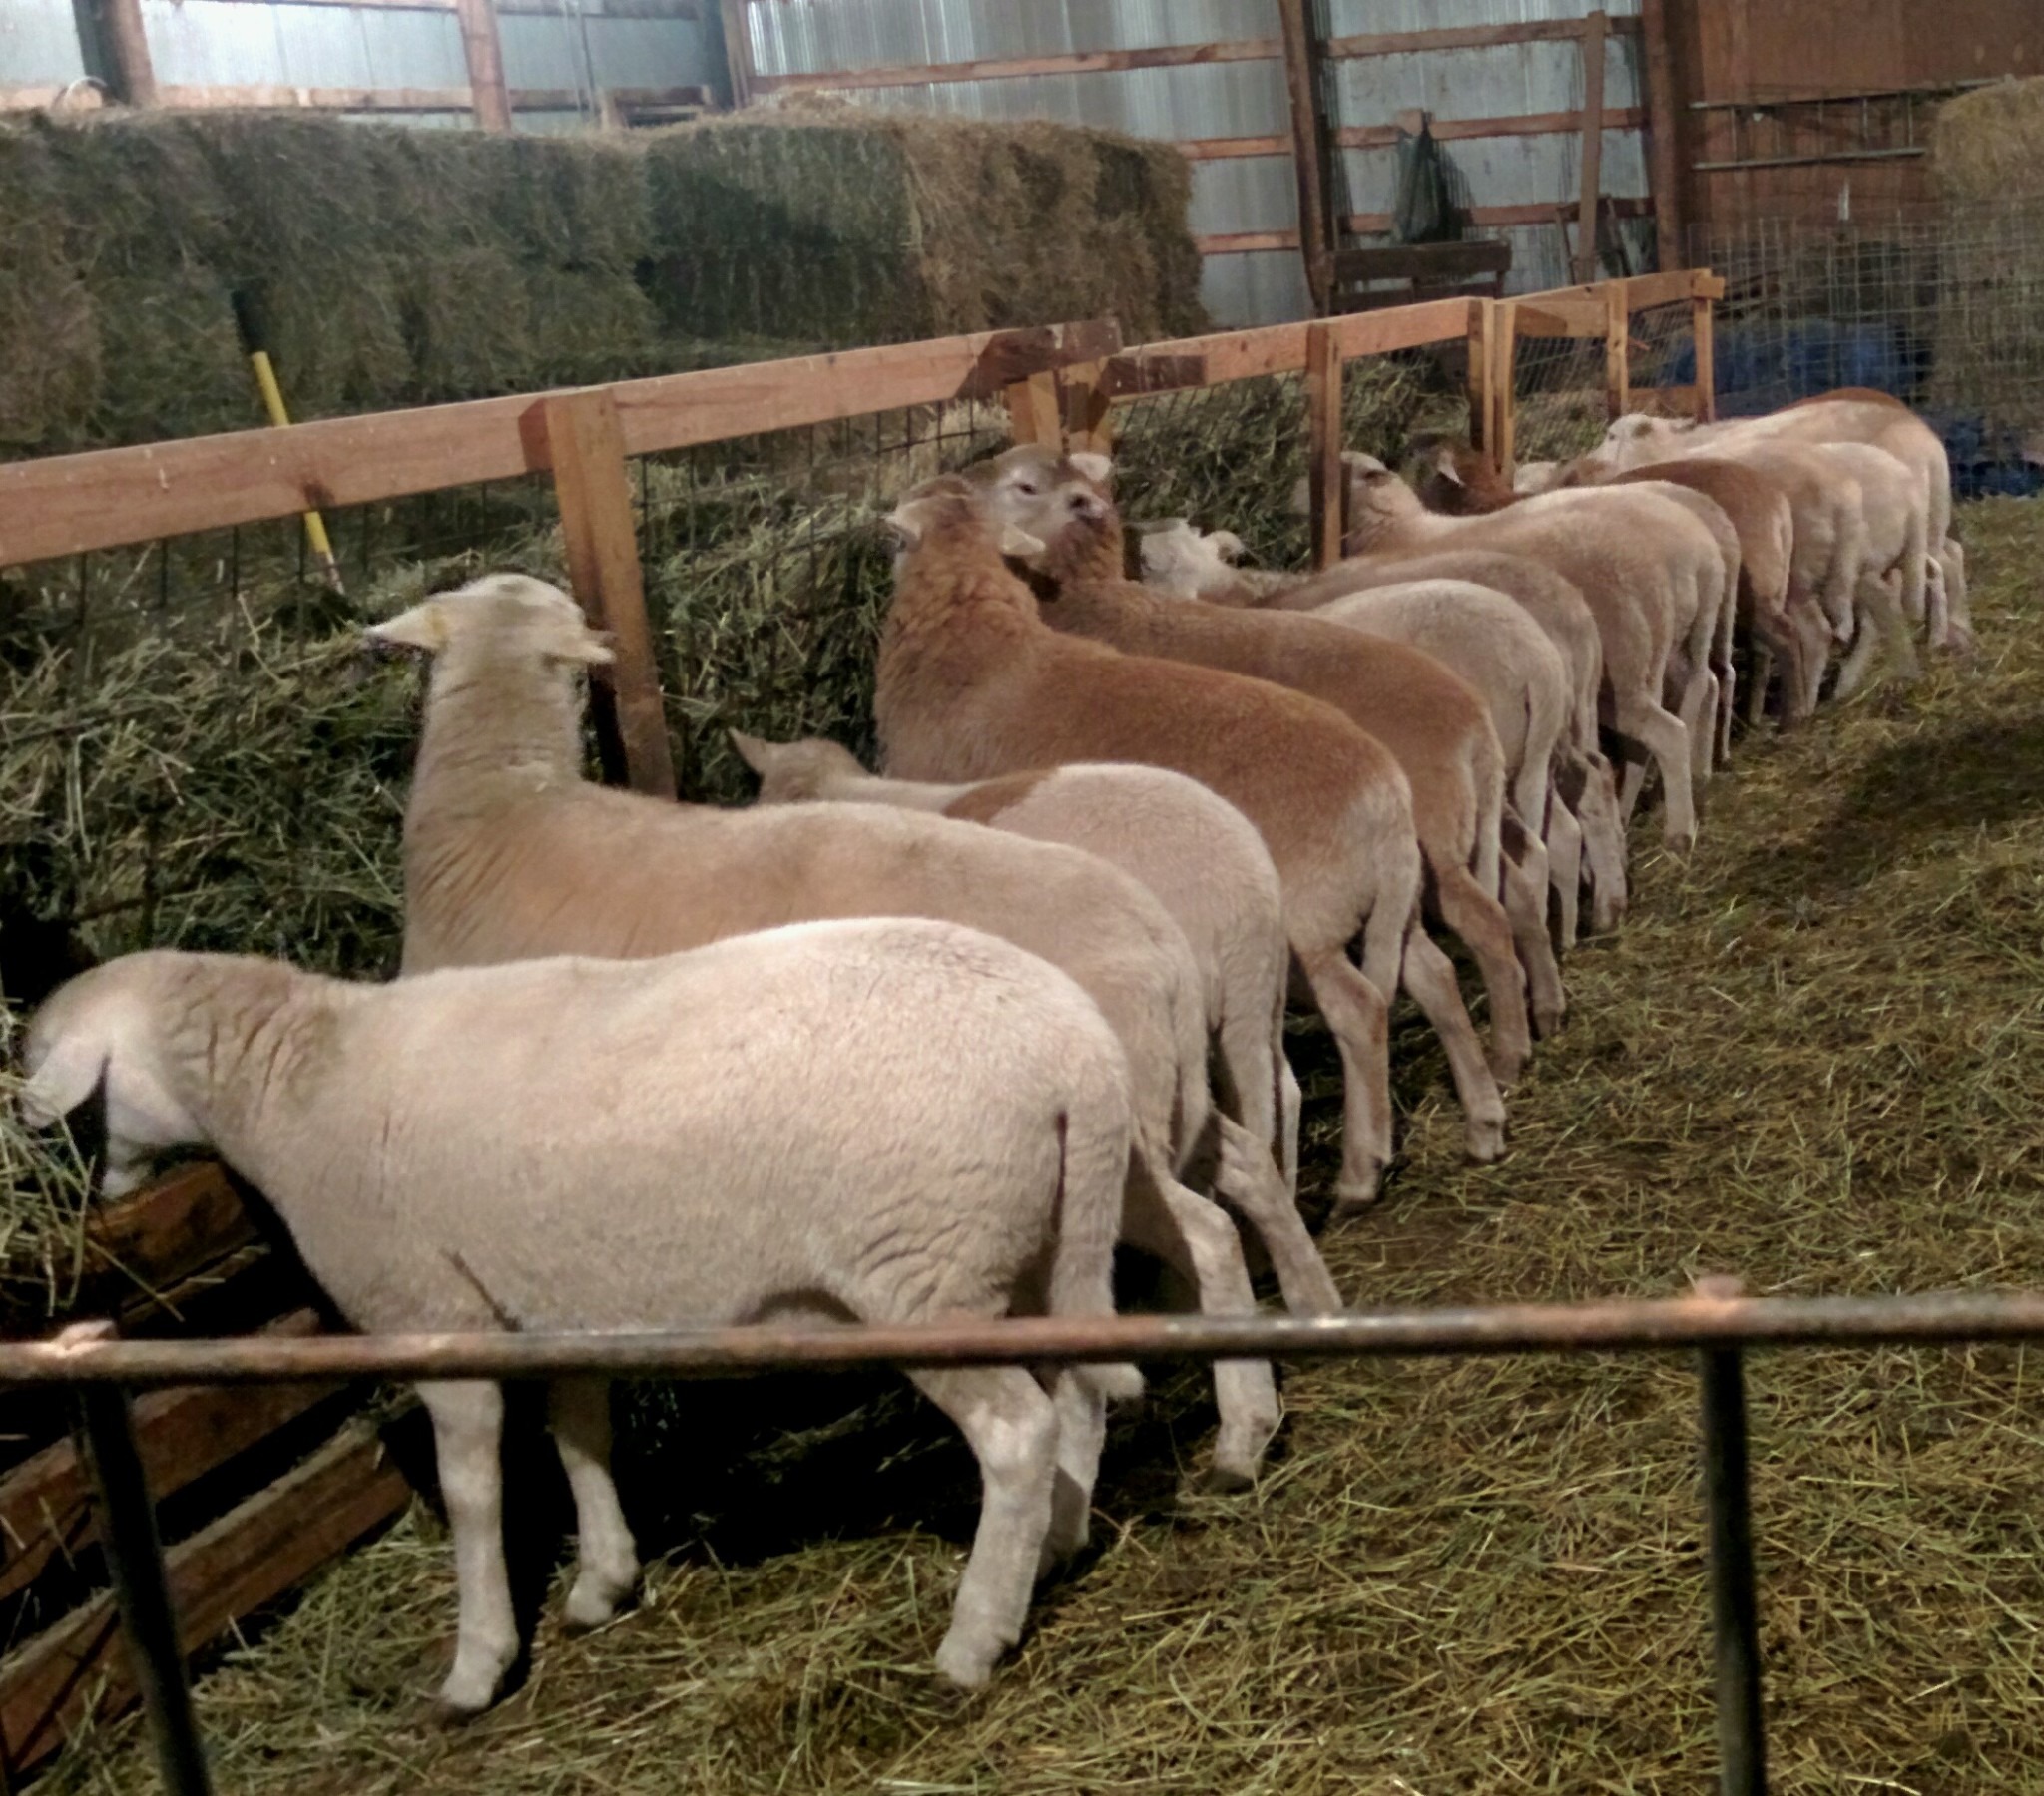 Pregnant ewes shown eating hay from a feeder. Photo courtesy of Deer Creek Farms.